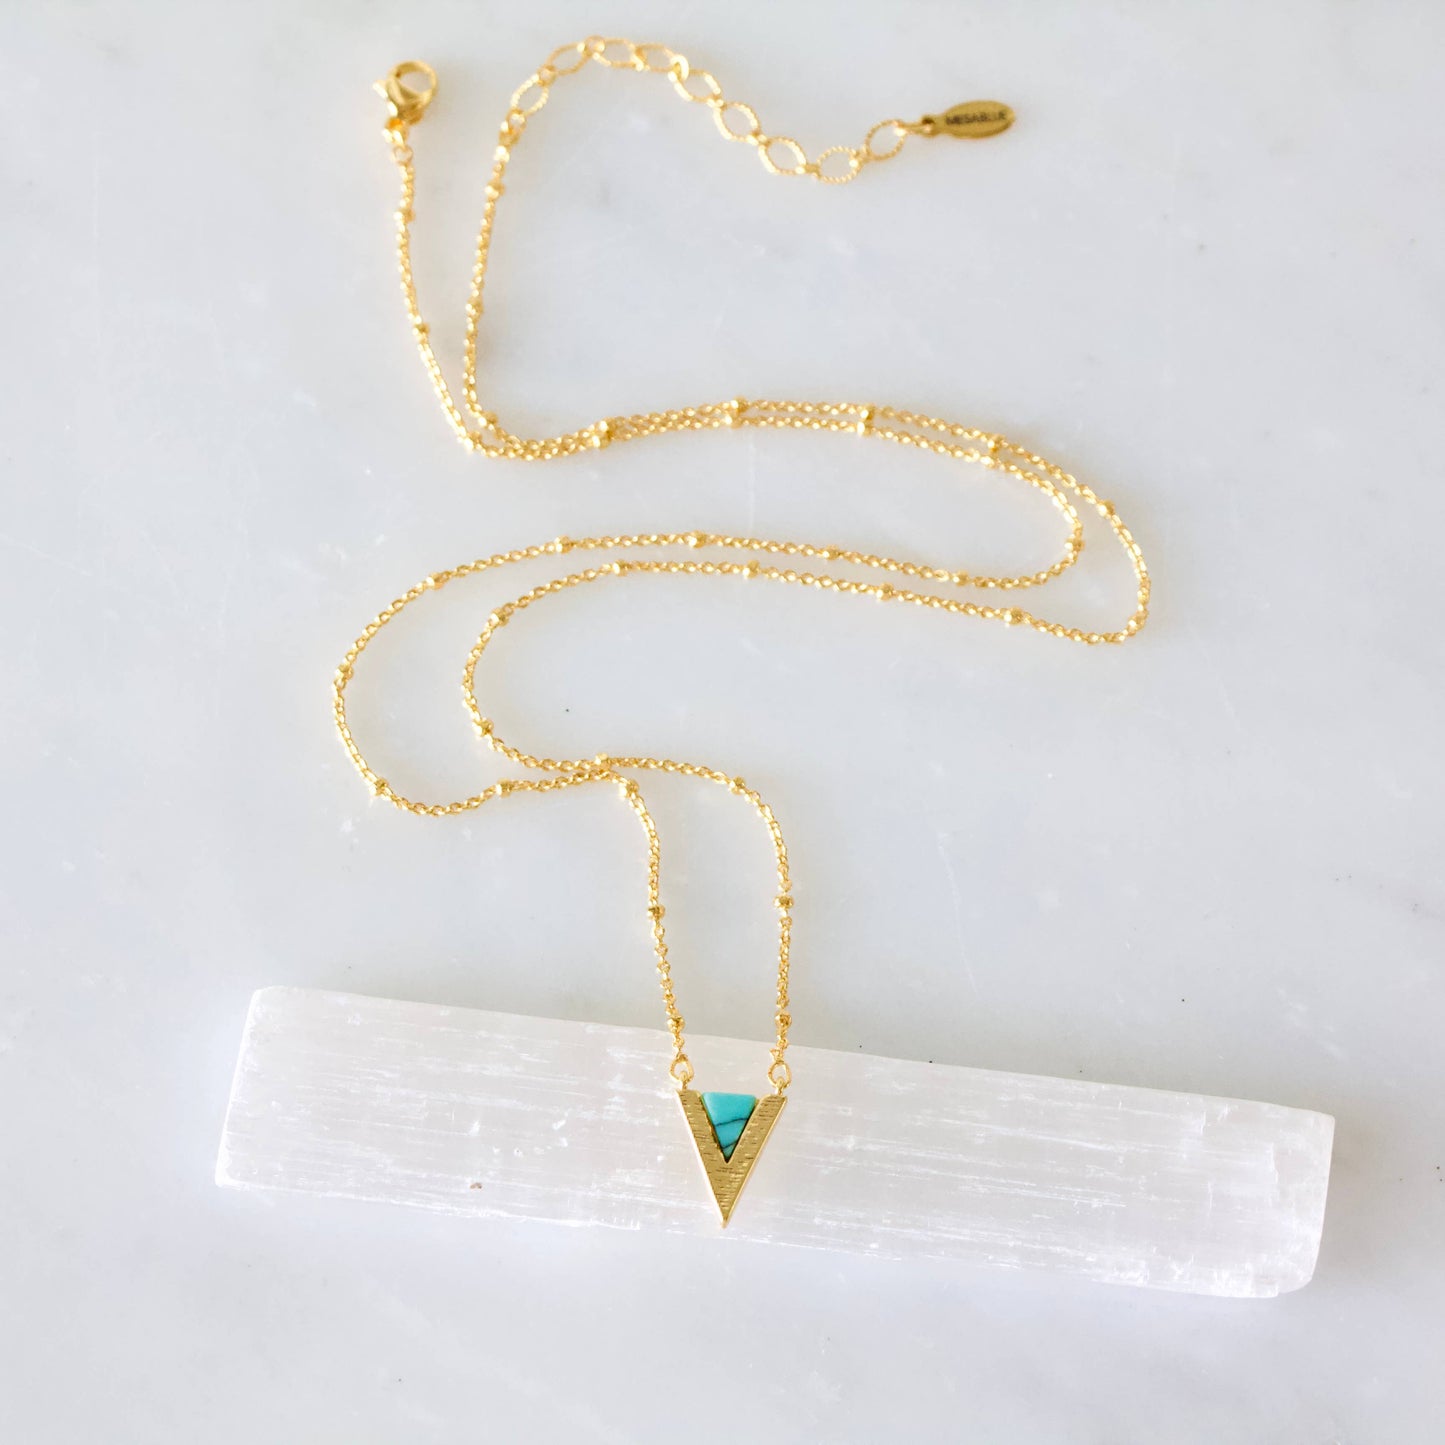 Turquoise Triangle Necklace - Storm and Sky Shoppe